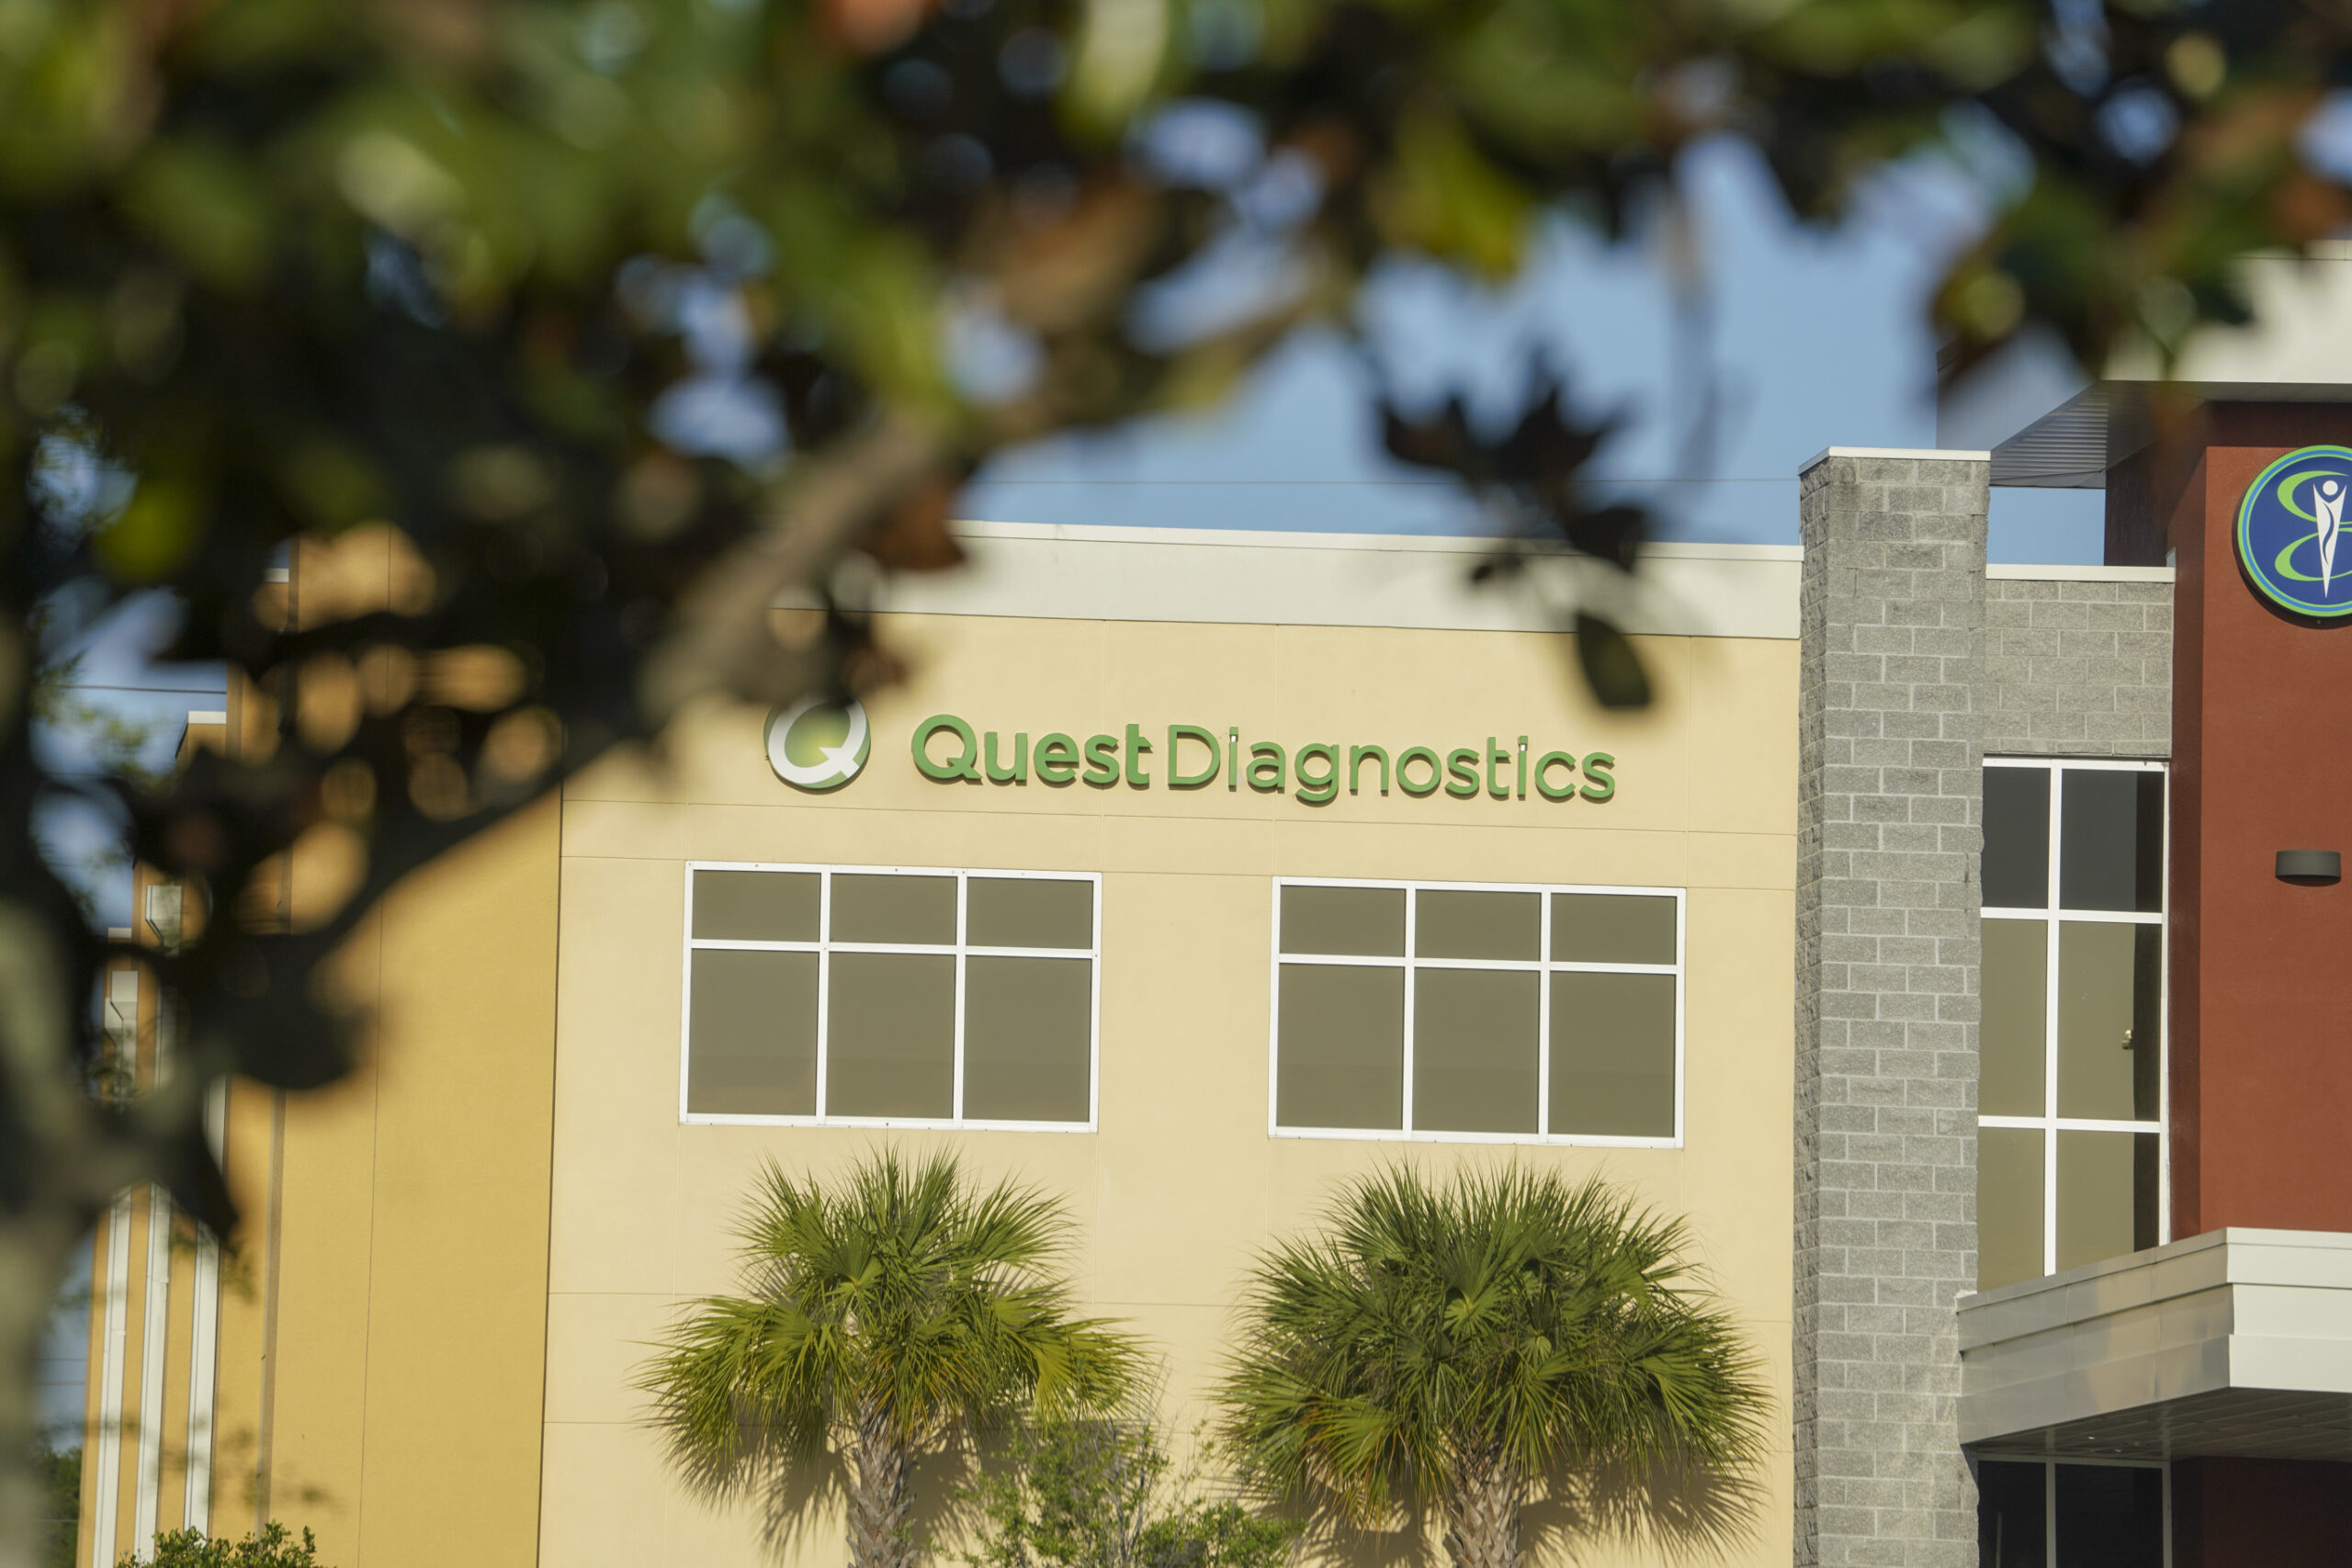 Quest Diagnostics has agreed to pay $5 million to settle state charges after being accused of discarding medical waste, chemicals, and patient information in dumpsters